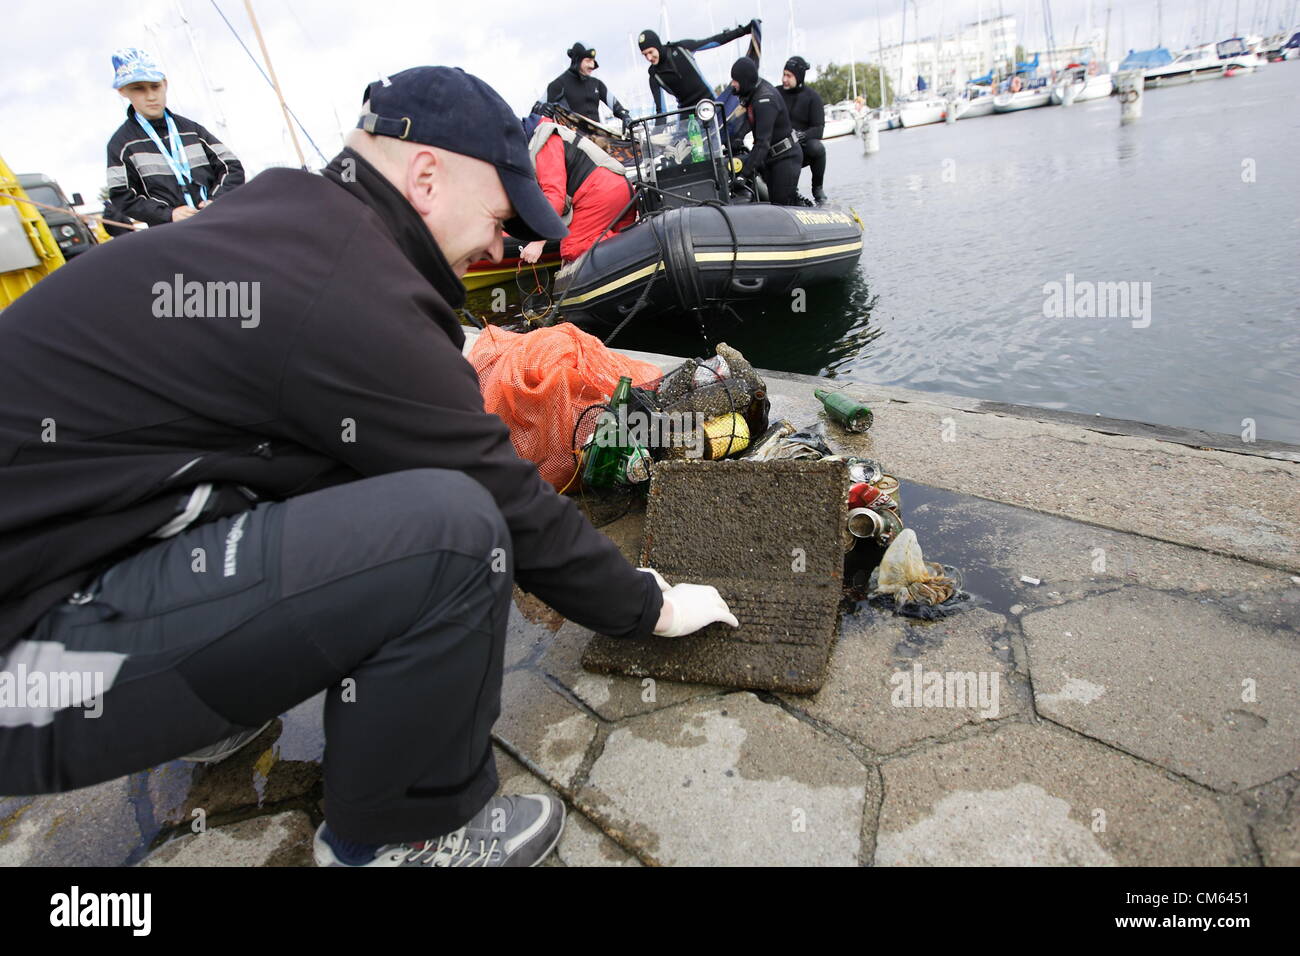 Gdynia, Poland 13th, October 2012 Eco-diving day 2012 . Over 100 divers takes part in the cleaning the Baltic Sea bottom near the Gdynia city marina and municipal beach. Among pile of rubbish they found few cellphones, laptop, camcorder and one satellite dish. Stock Photo